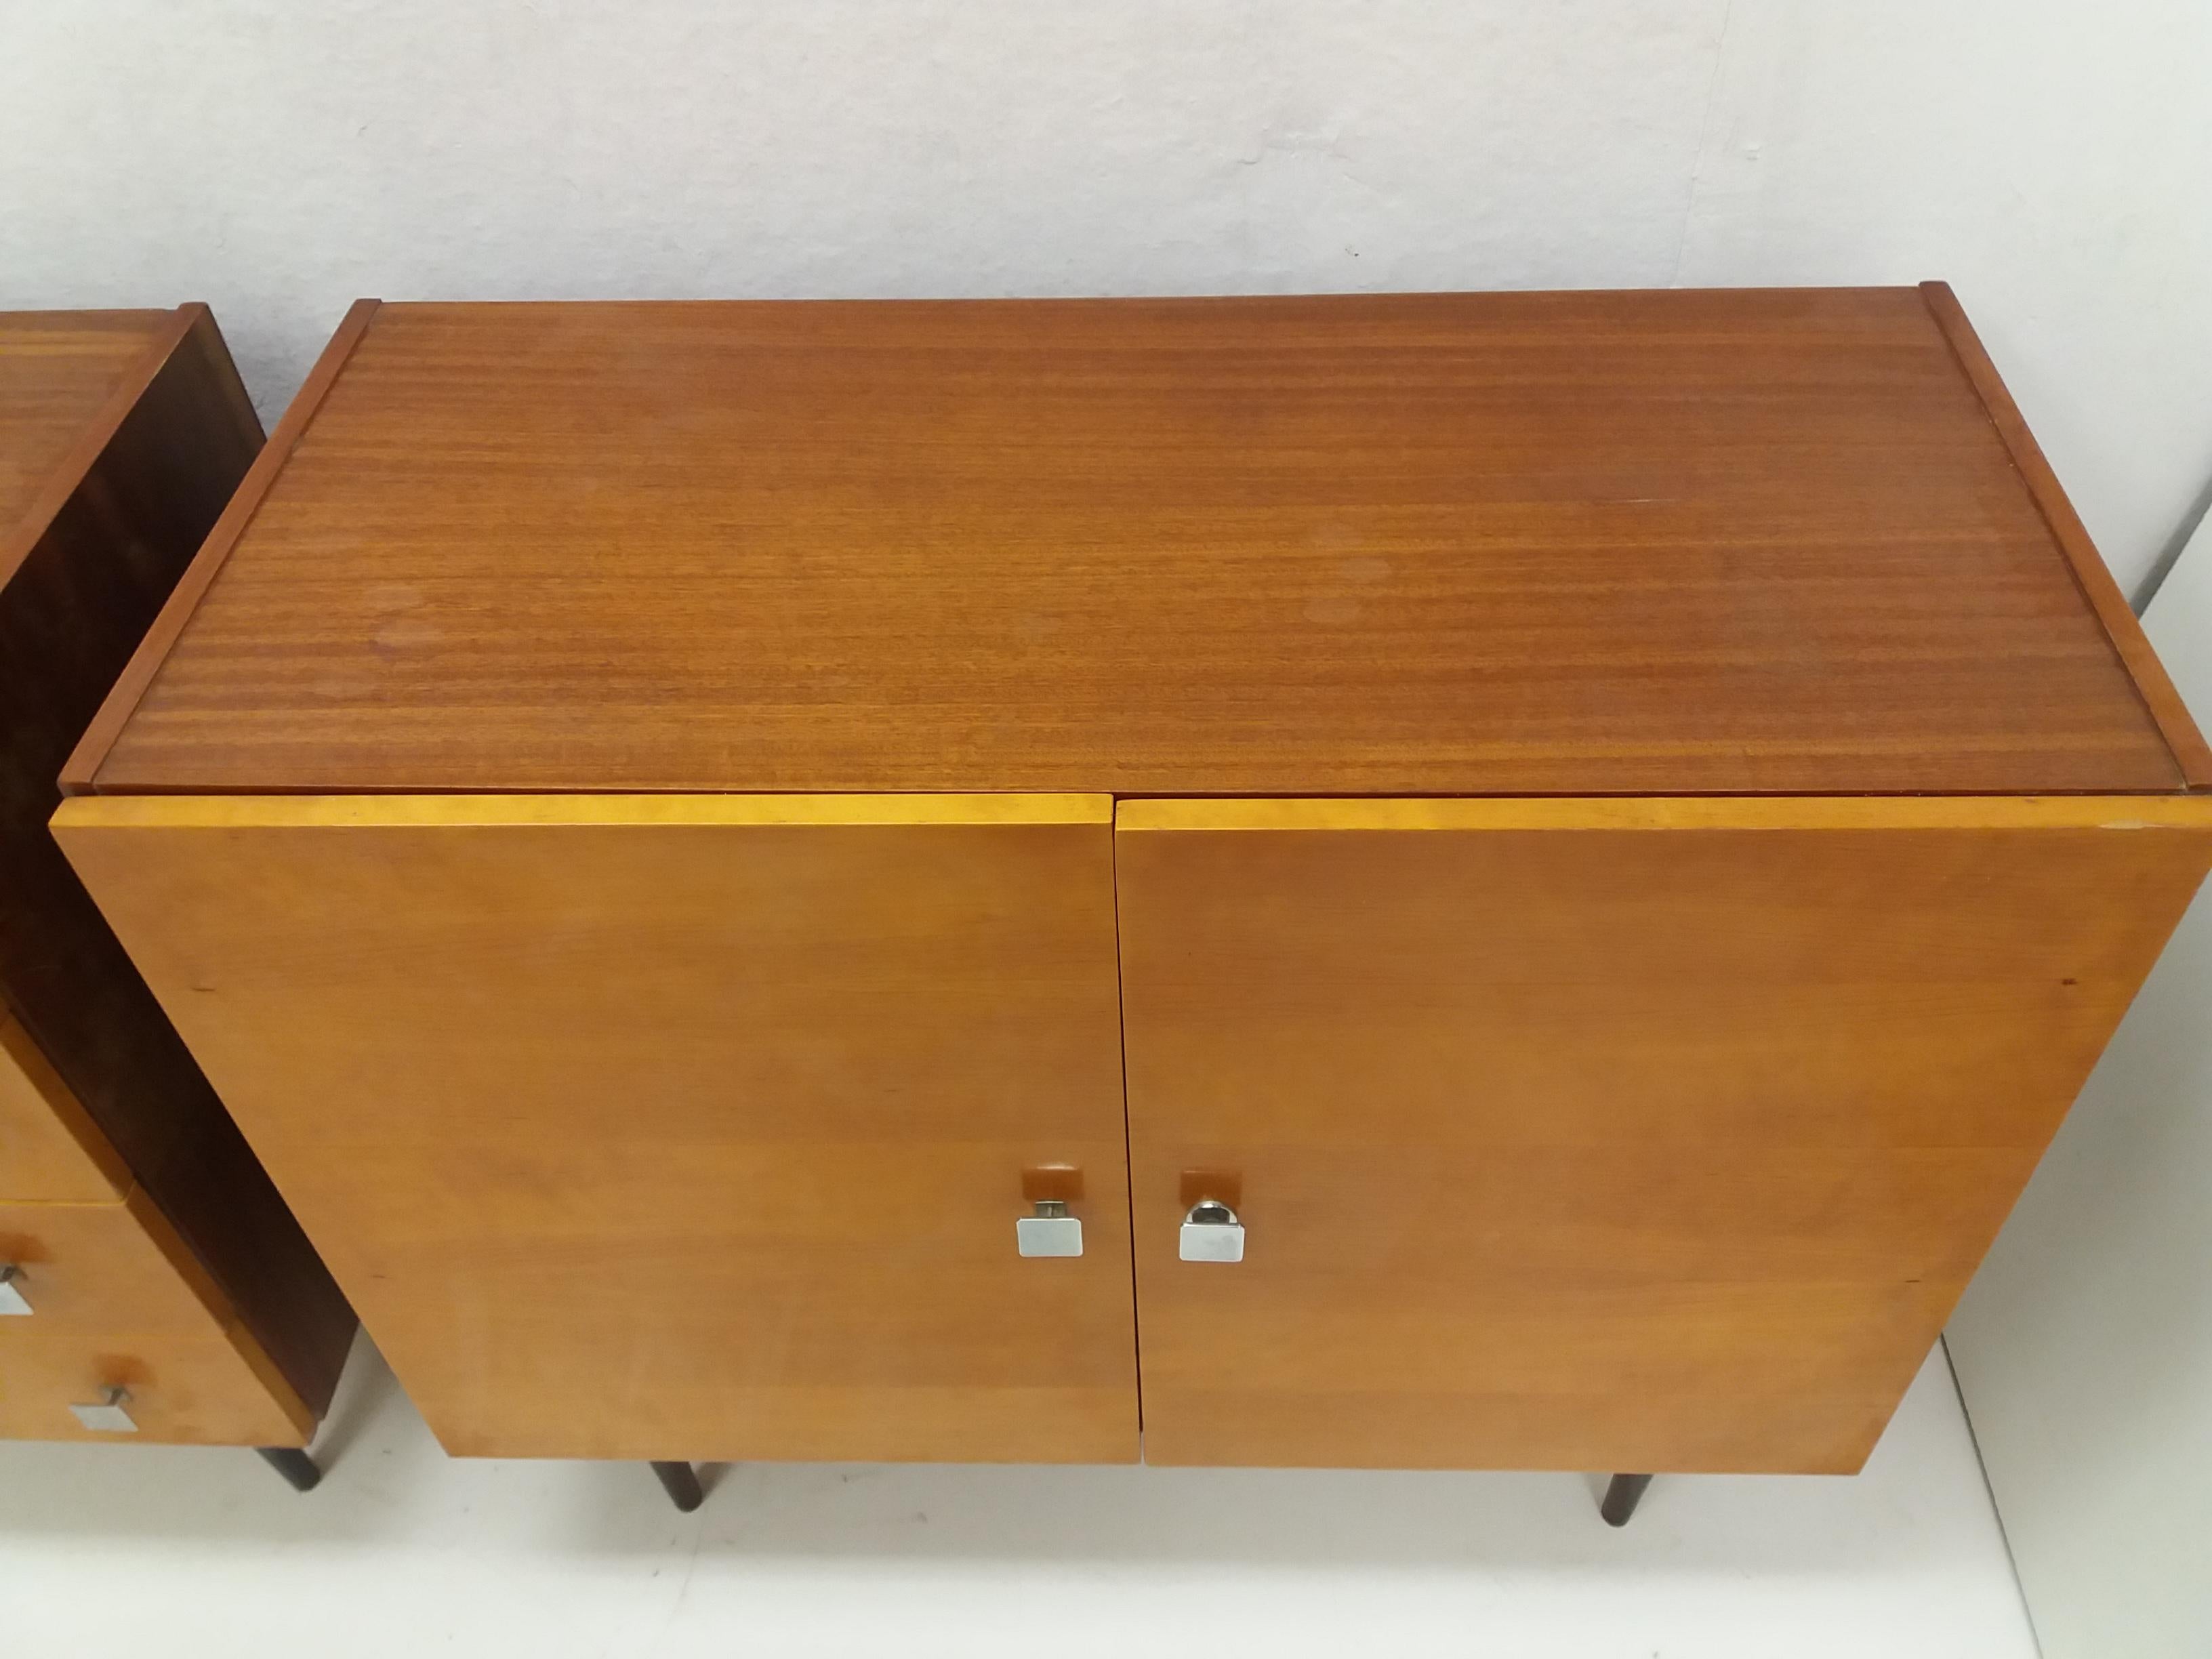 - Made of Czechoslovakia
- Made of wood, chrome, metal
- Dimensions of chest of drawer: H 79cm x W 60cm x D 42cm
- Good, original condition.
   